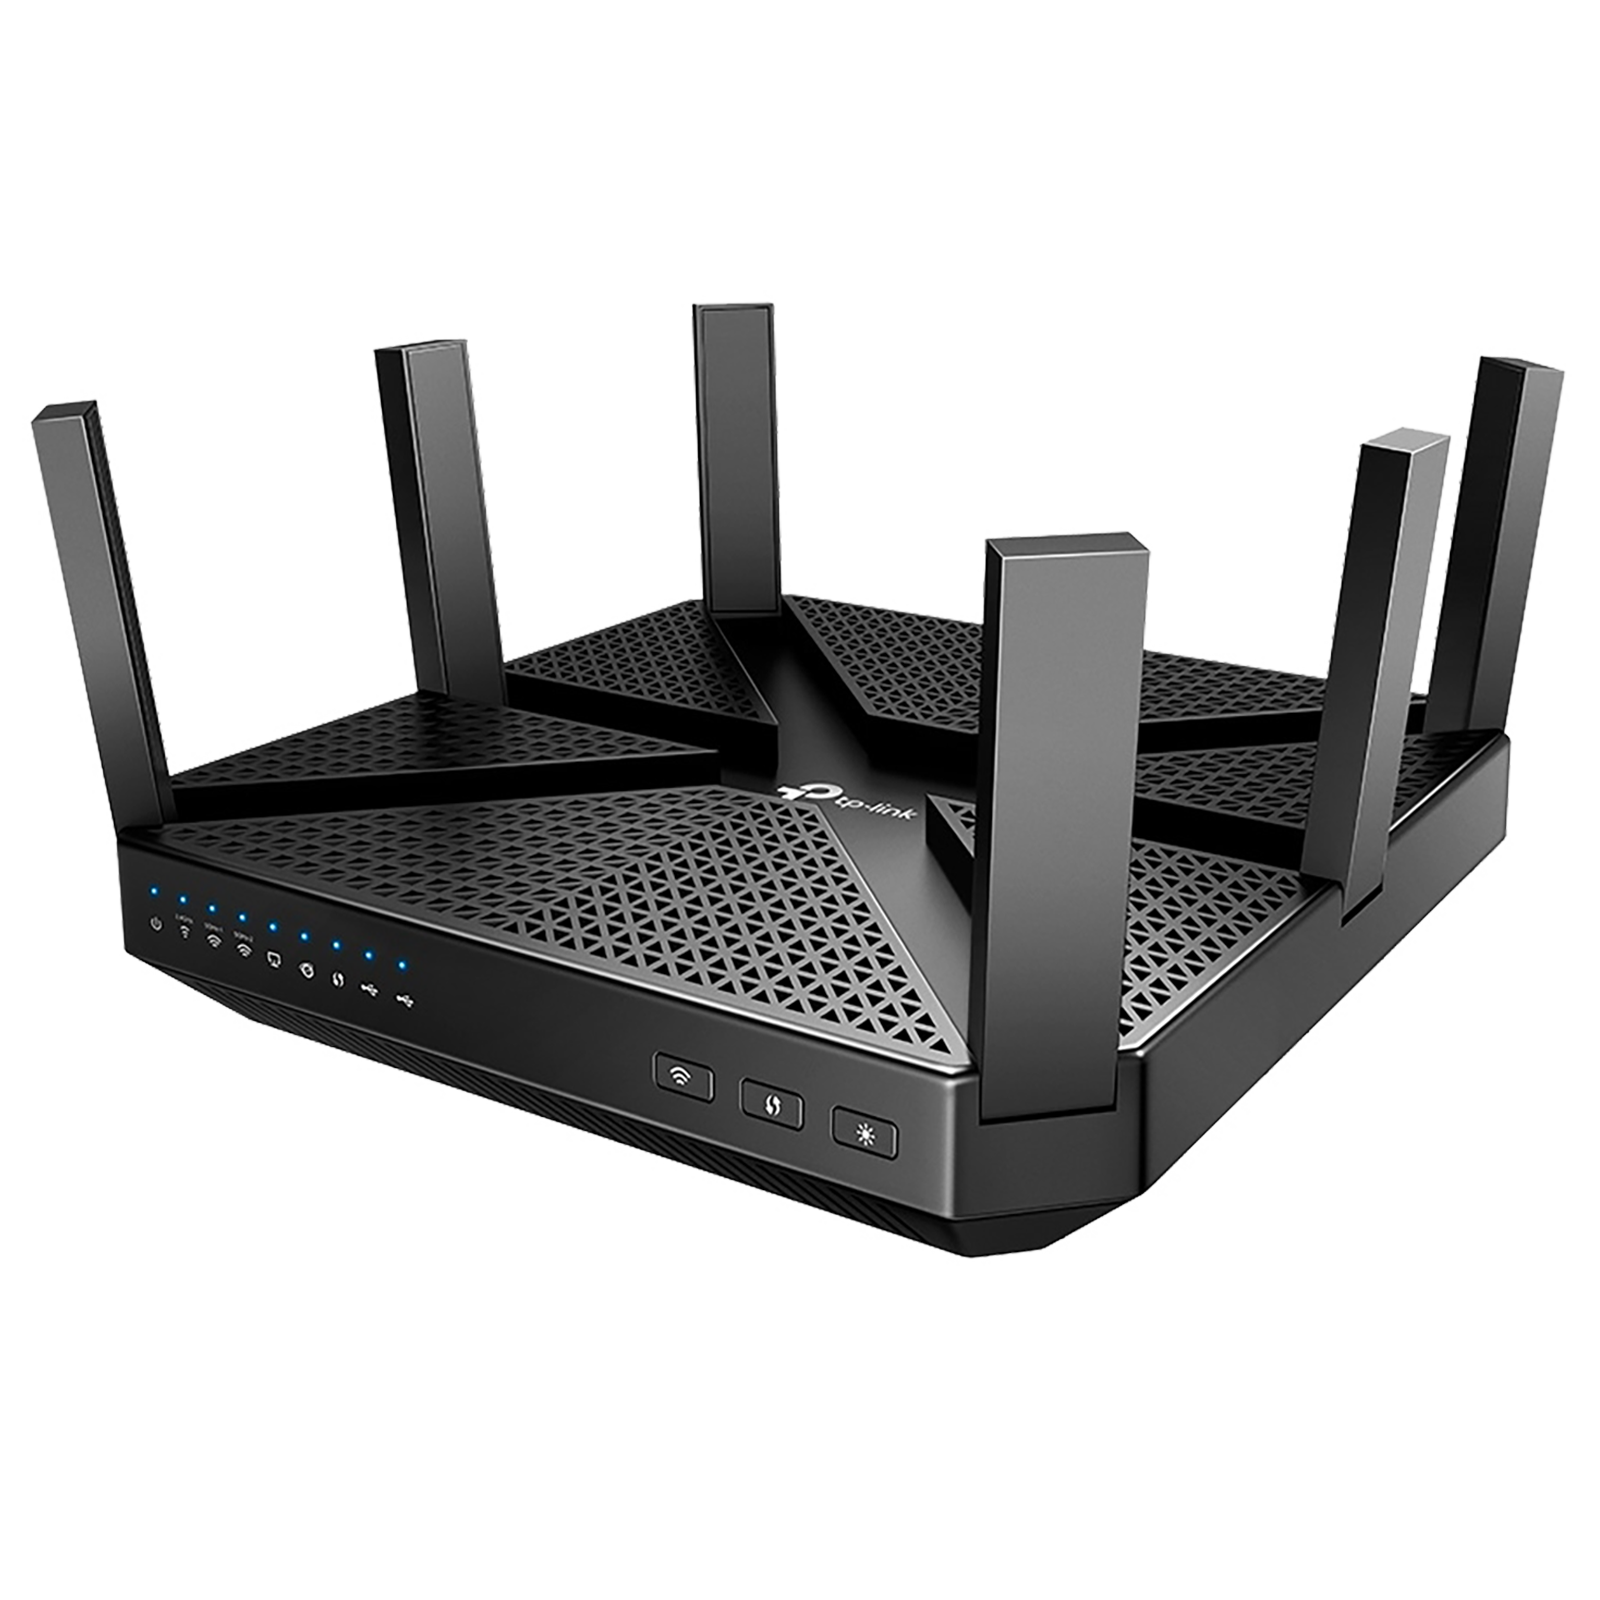 Tp-Link Archer C4000 AC4000 Triple Band Wi-Fi Router (6 Antennas, 4 LAN Ports, Alexa Supported, 1750502383, Black)_1